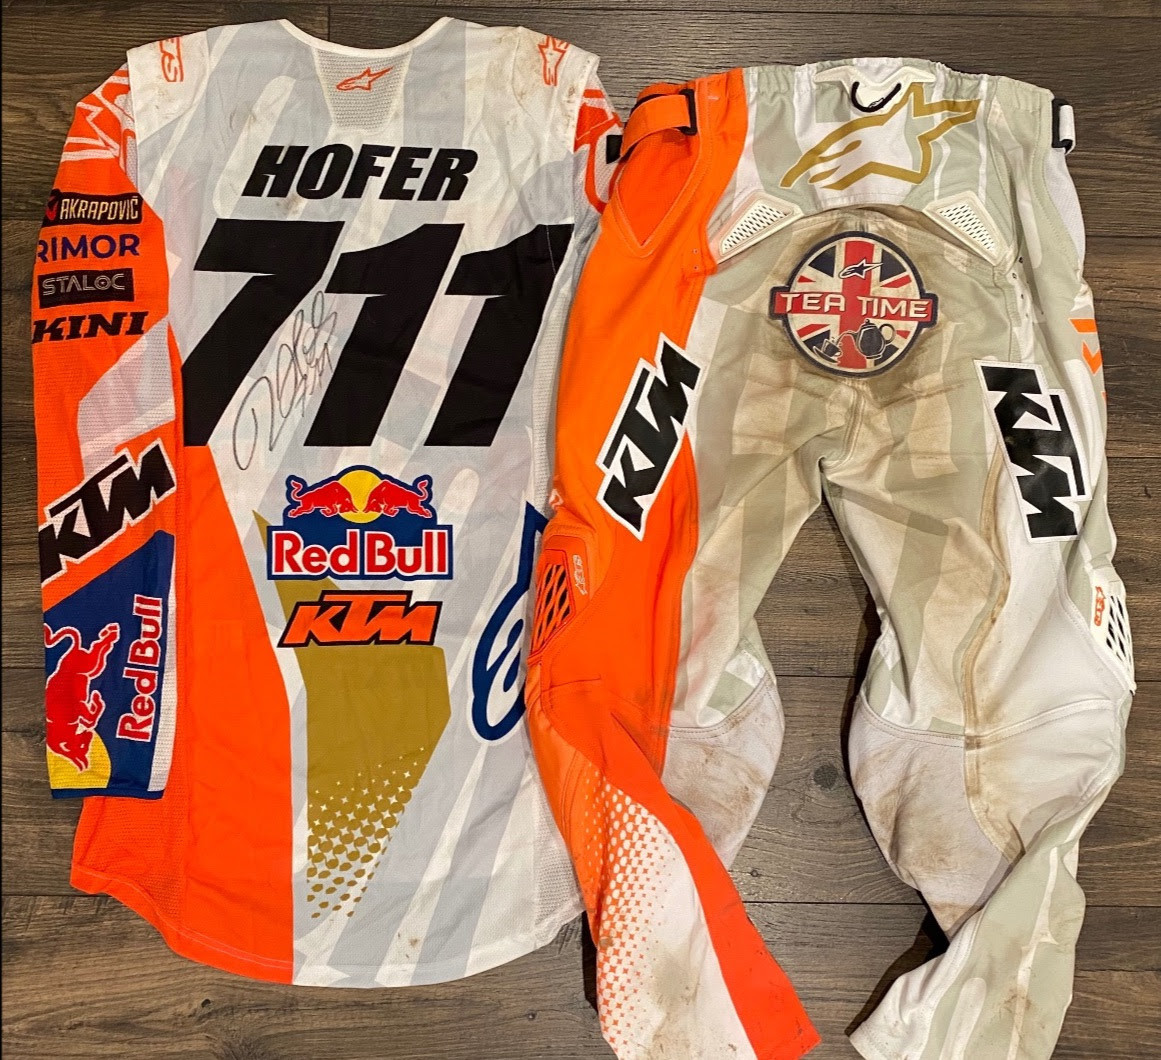 Road 2 Recovery Announces eBay Auction To Benefit Brian Moreau - Racer X